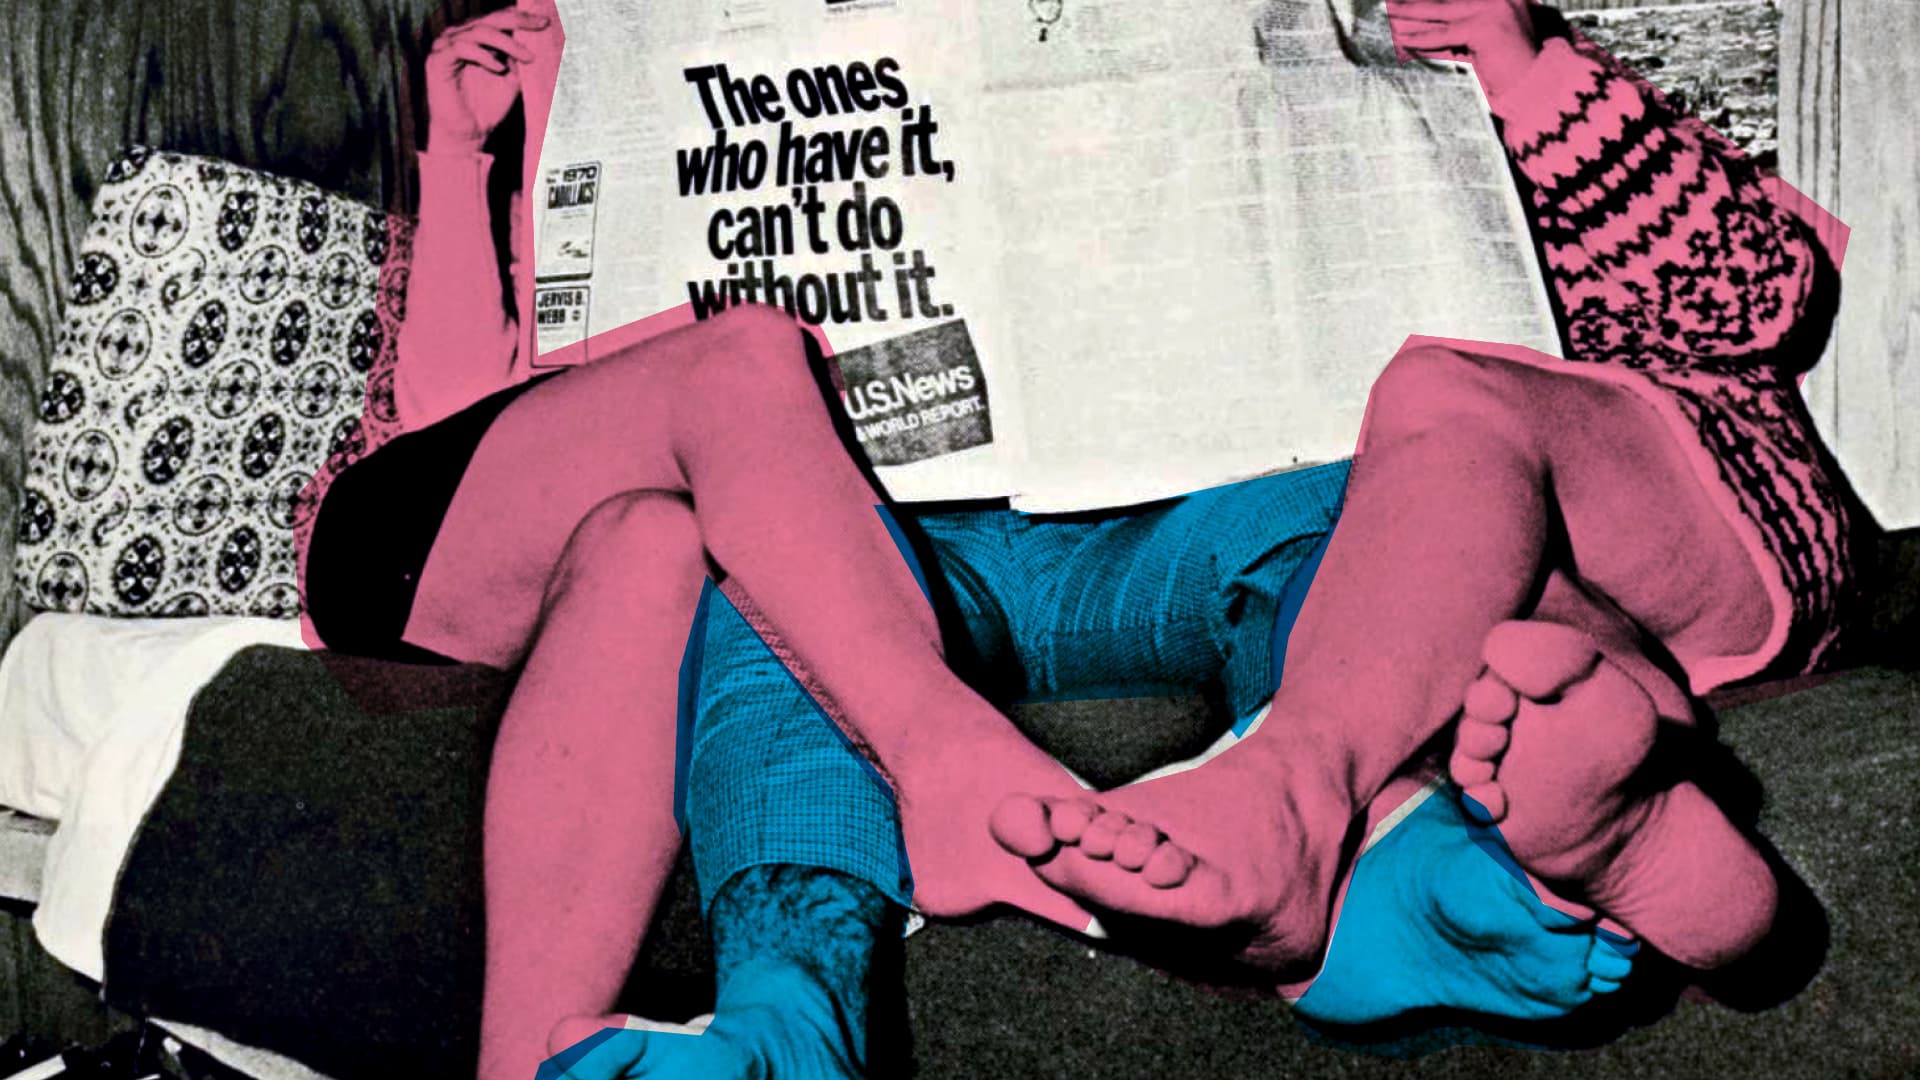 Two women's legs, colored pink, crossed around a man's legs, colored blue, as they read the newspaper